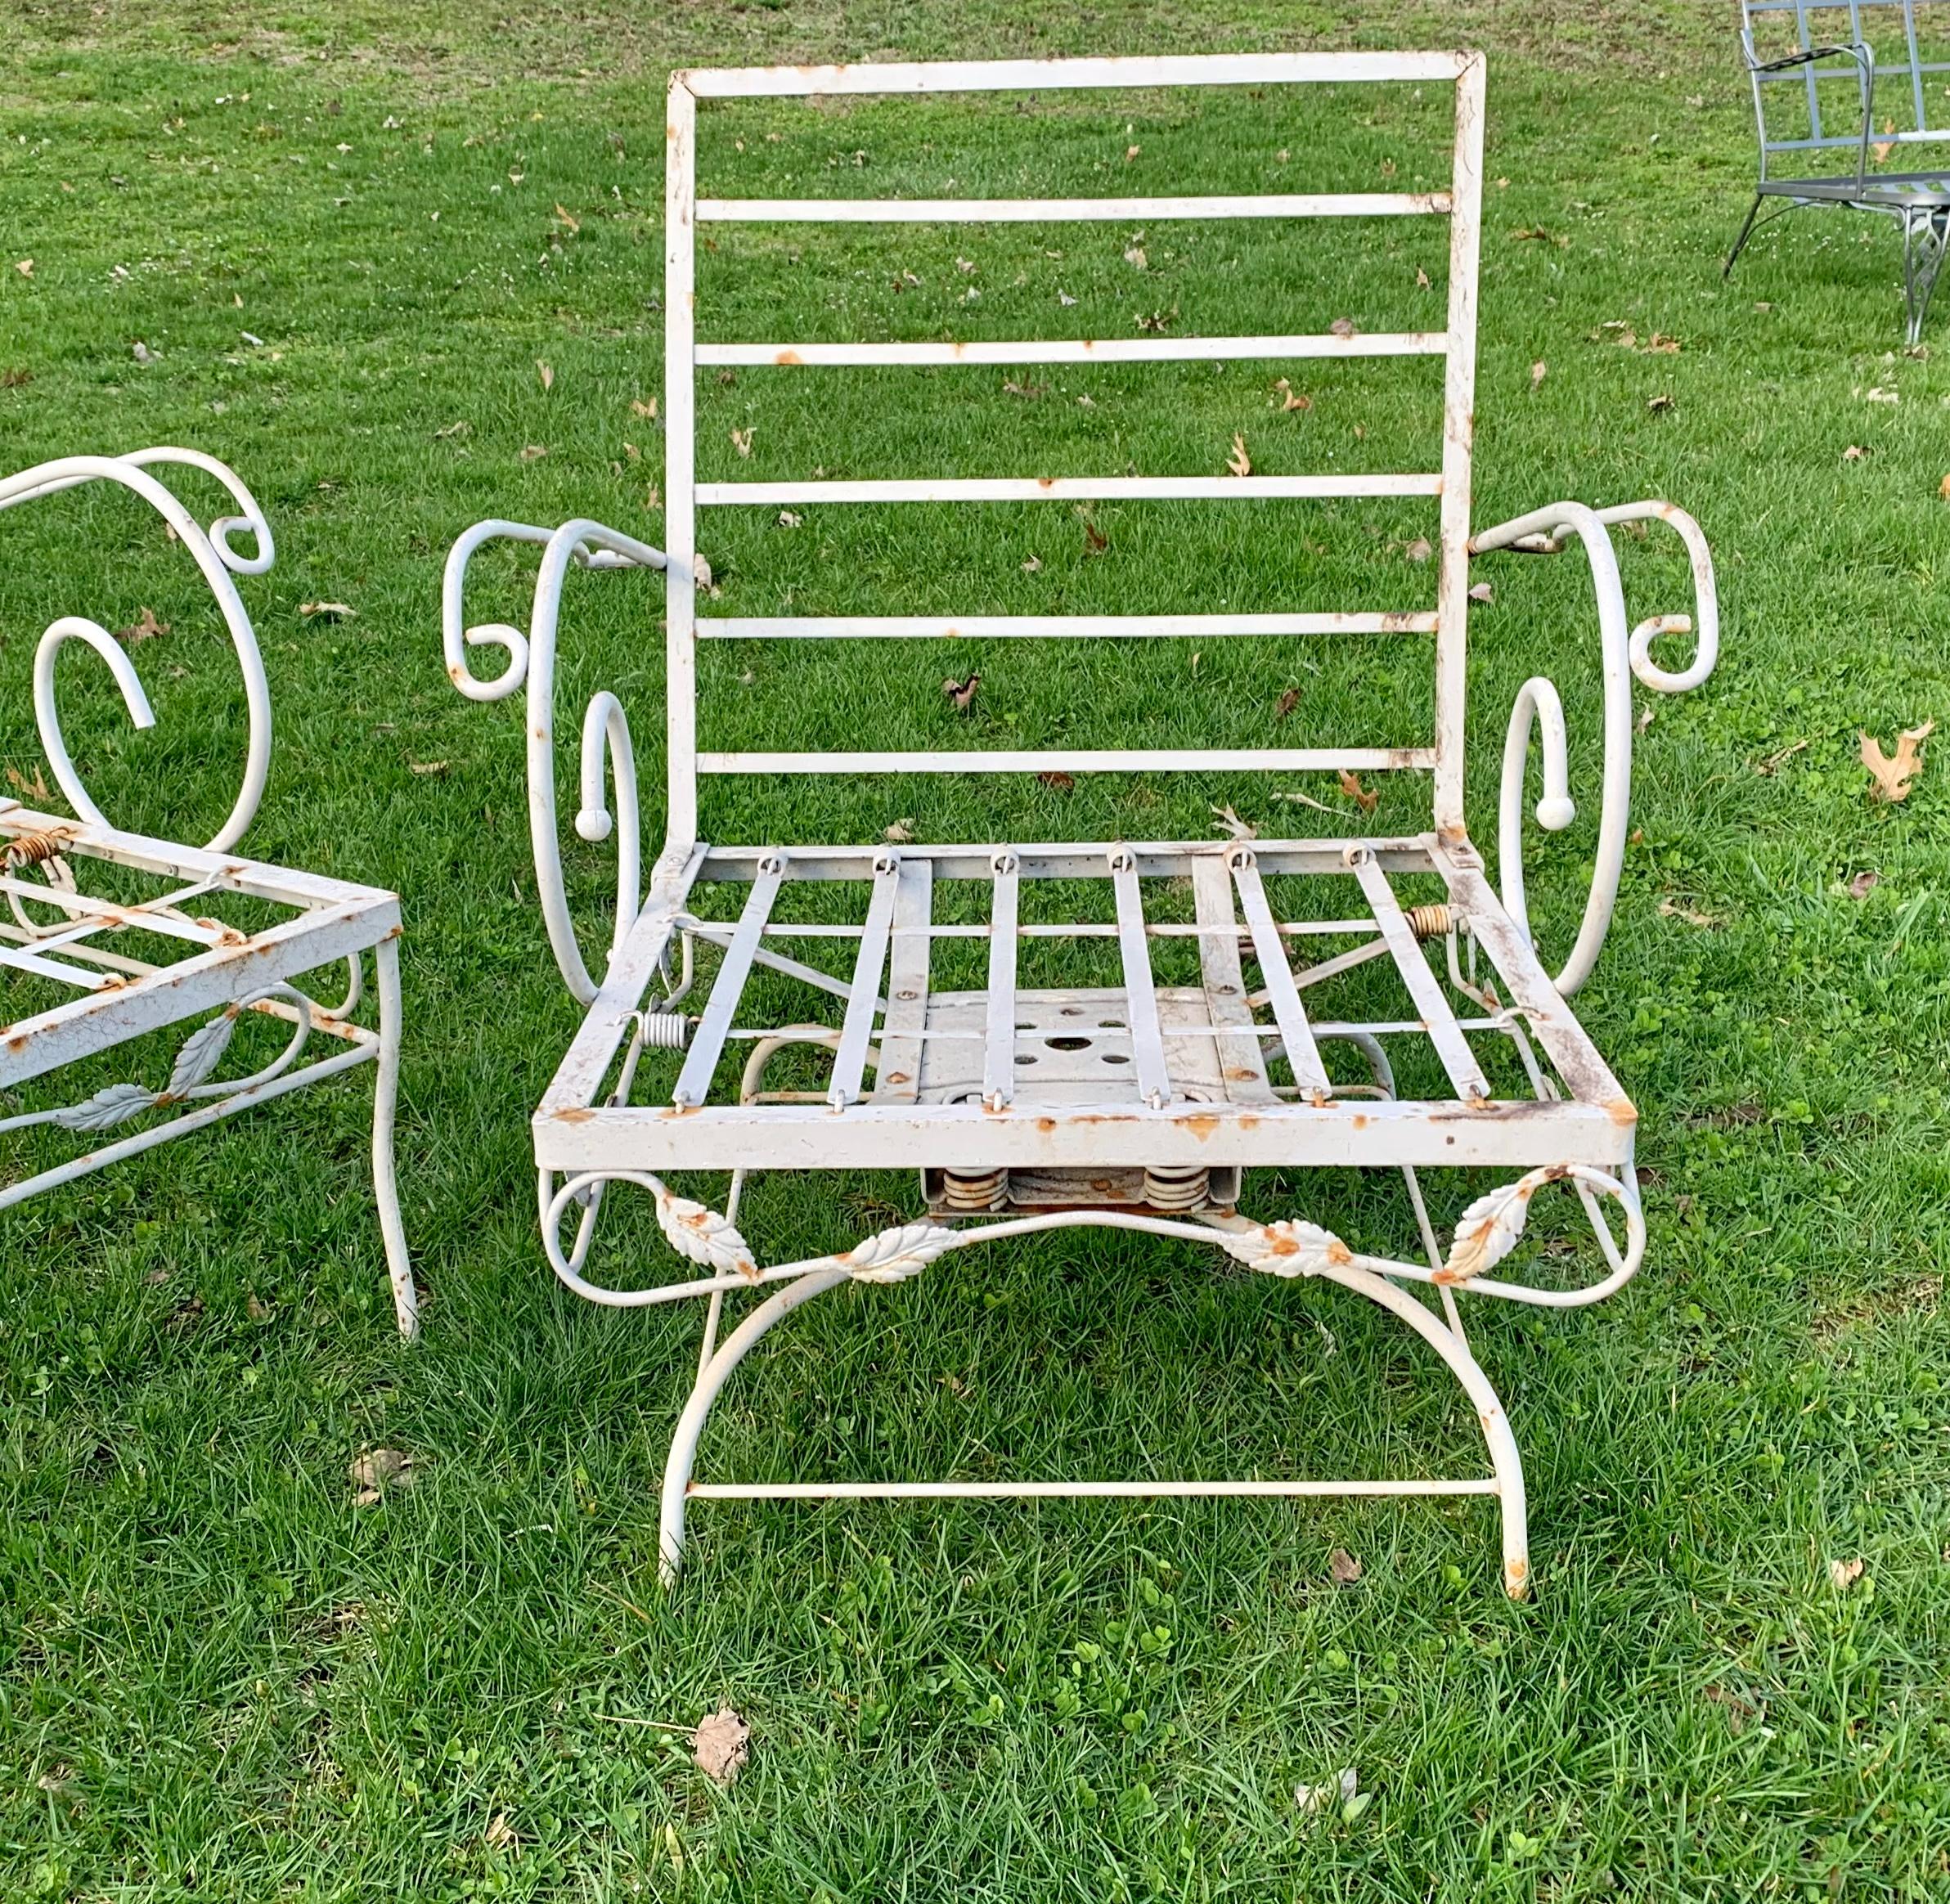 Vintage Wrought Iron Loveseat and armchair.

Heavy wrought iron set with scrolled arms in the style of Salterini. Includes one Wrought Iron Loveseat Settee and matching Deep Seated armchair.

Perfect for any terrace, garden, or patio. Sandblasting